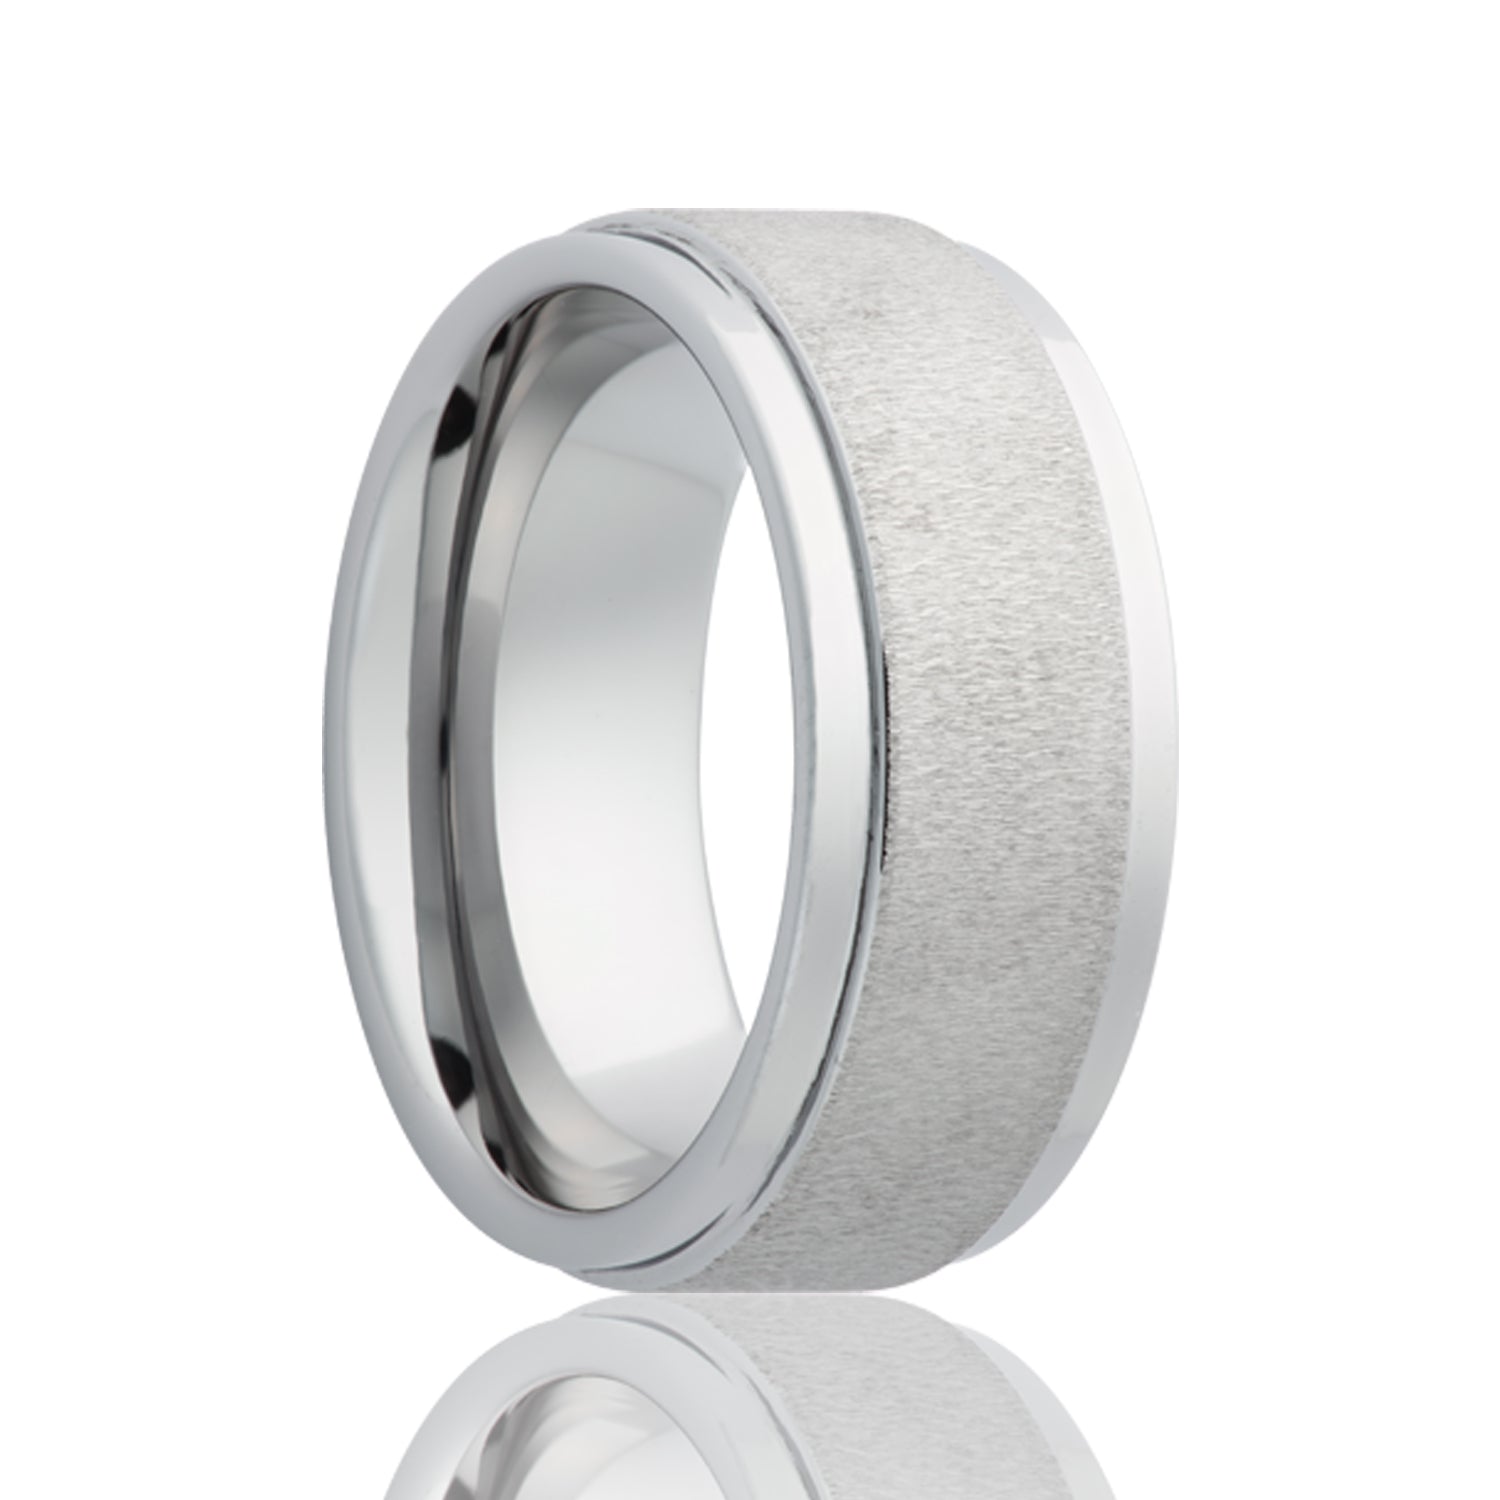 A textured cobalt wedding band with stepped edges displayed on a neutral white background.